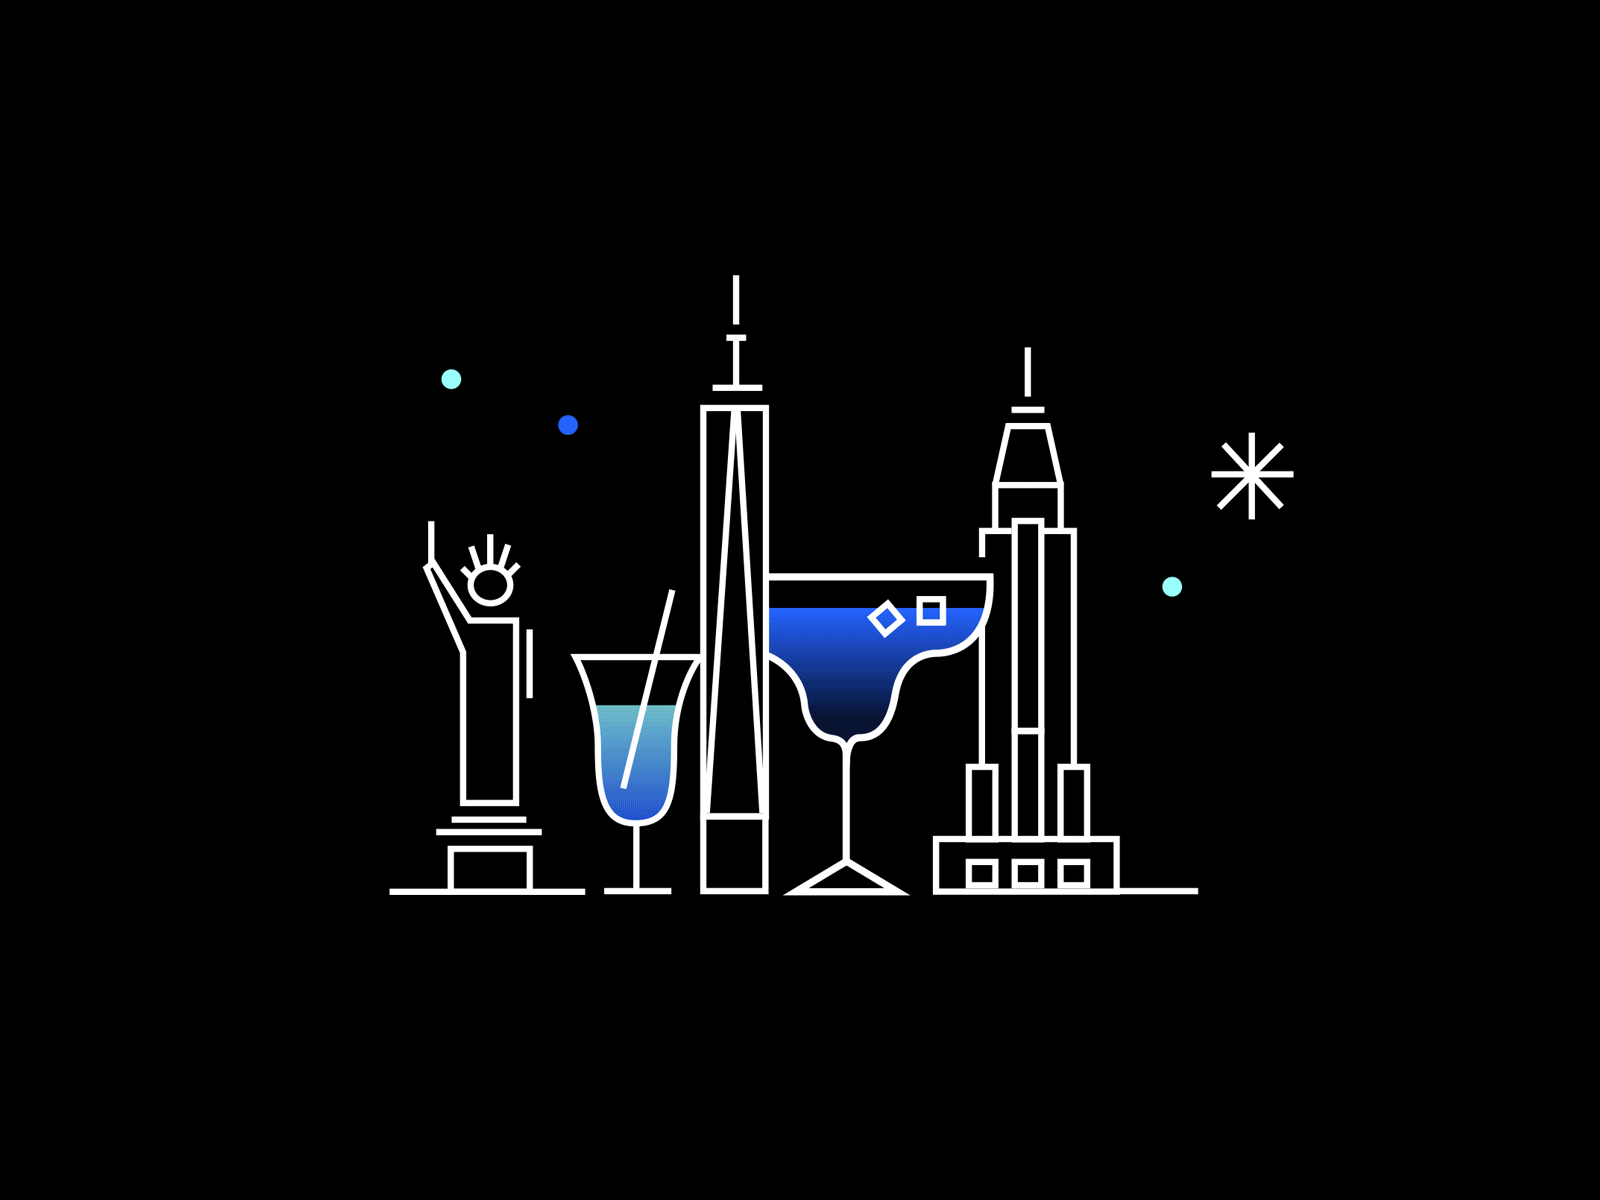 Cheers 🥂🌟 alcohol bold booze bright celebrate celebration city drinking drinks fireworks flat illustration line linework new years new years eve nye party skyline vector